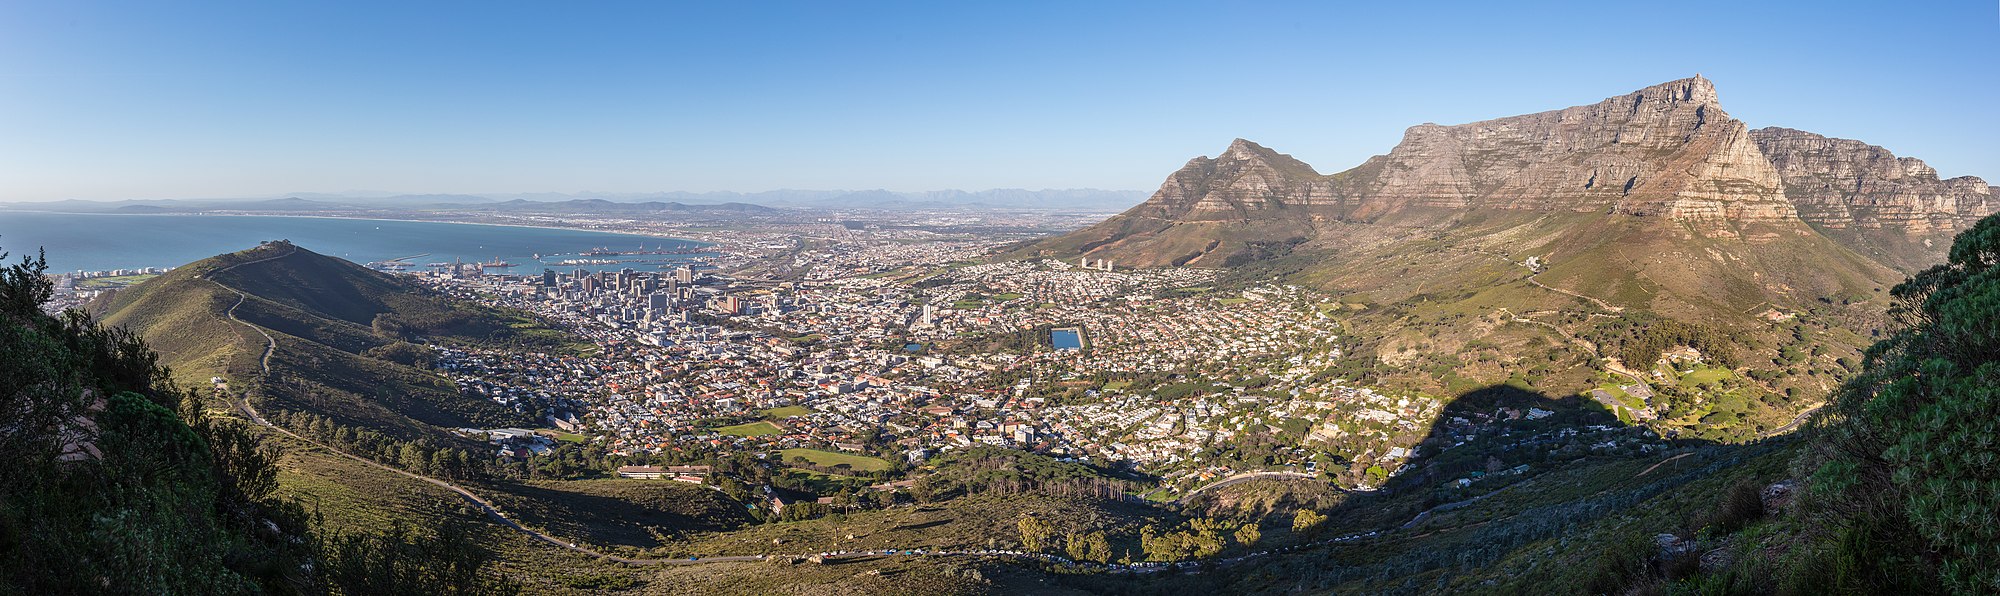 Cape Town viewed from Lion's Head, South Africa